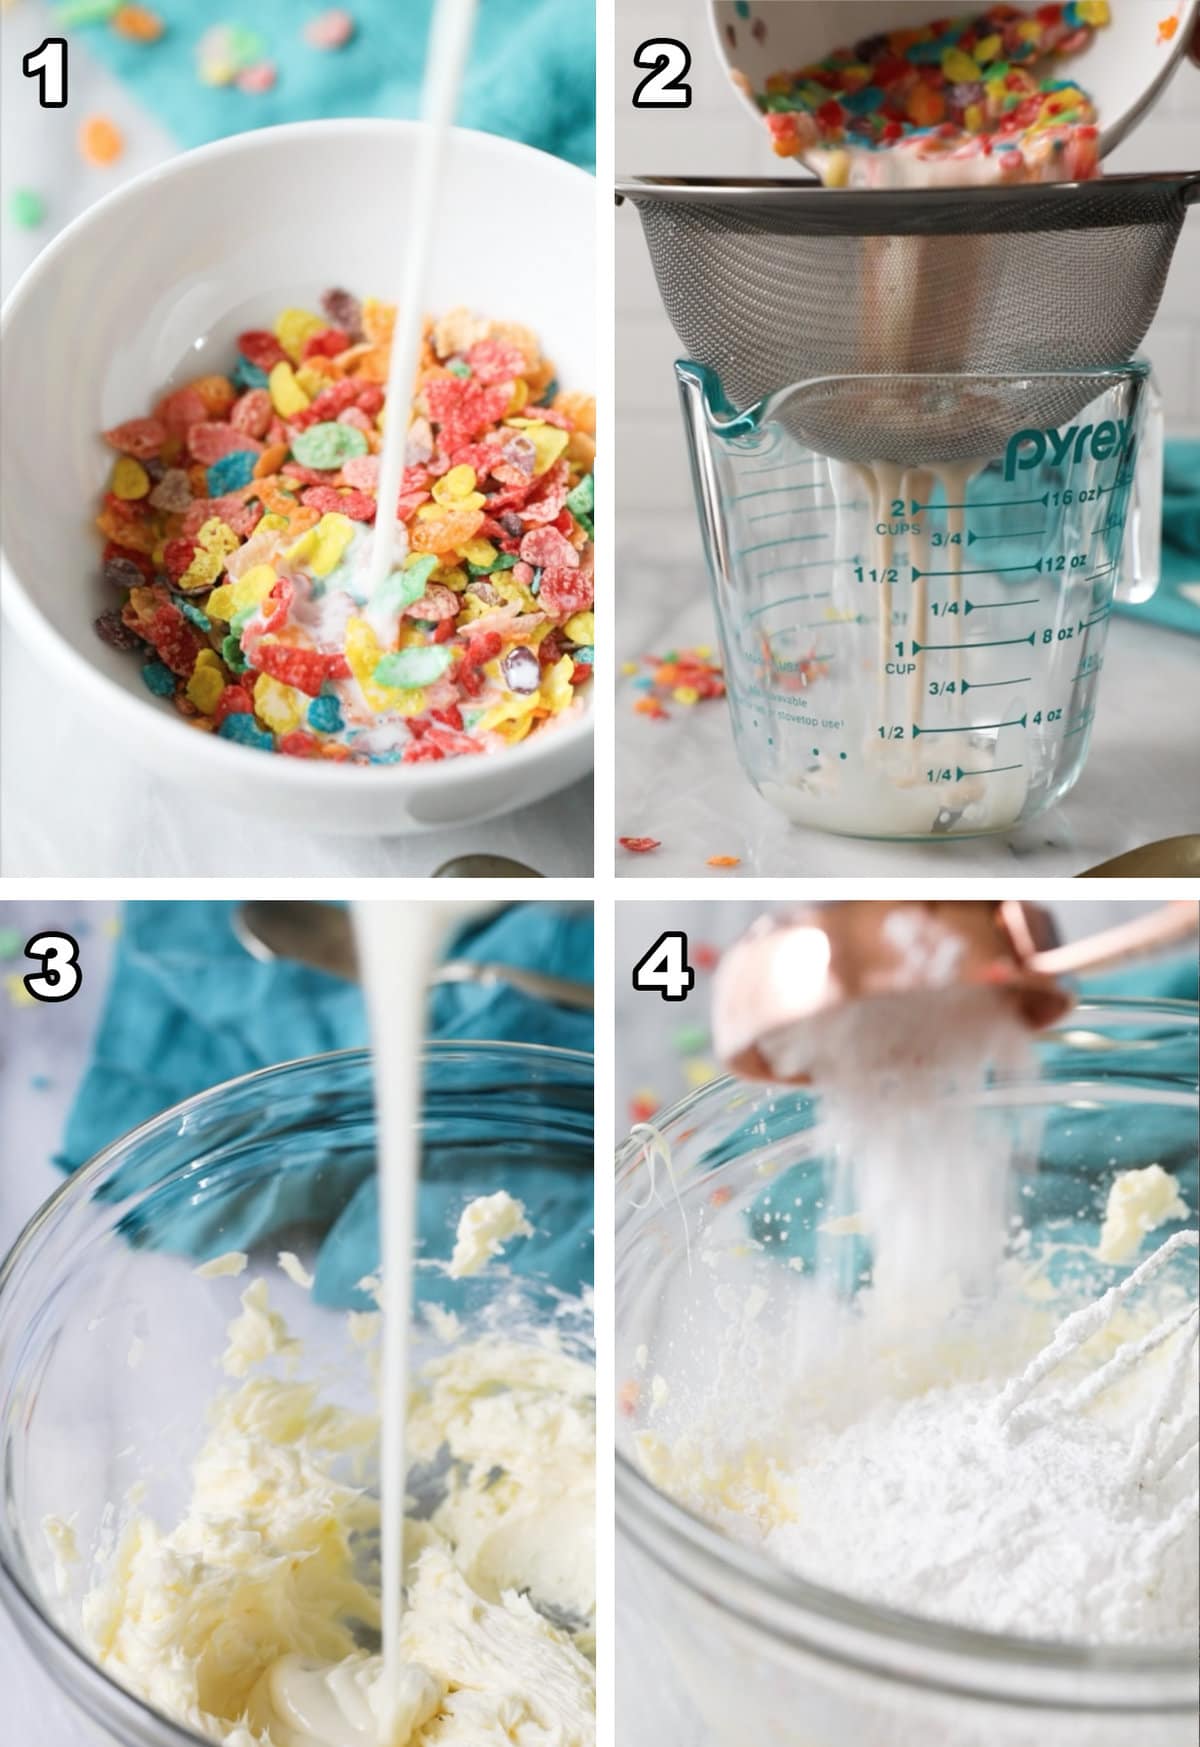 Four photos showing fruity pebble frosting being prepared